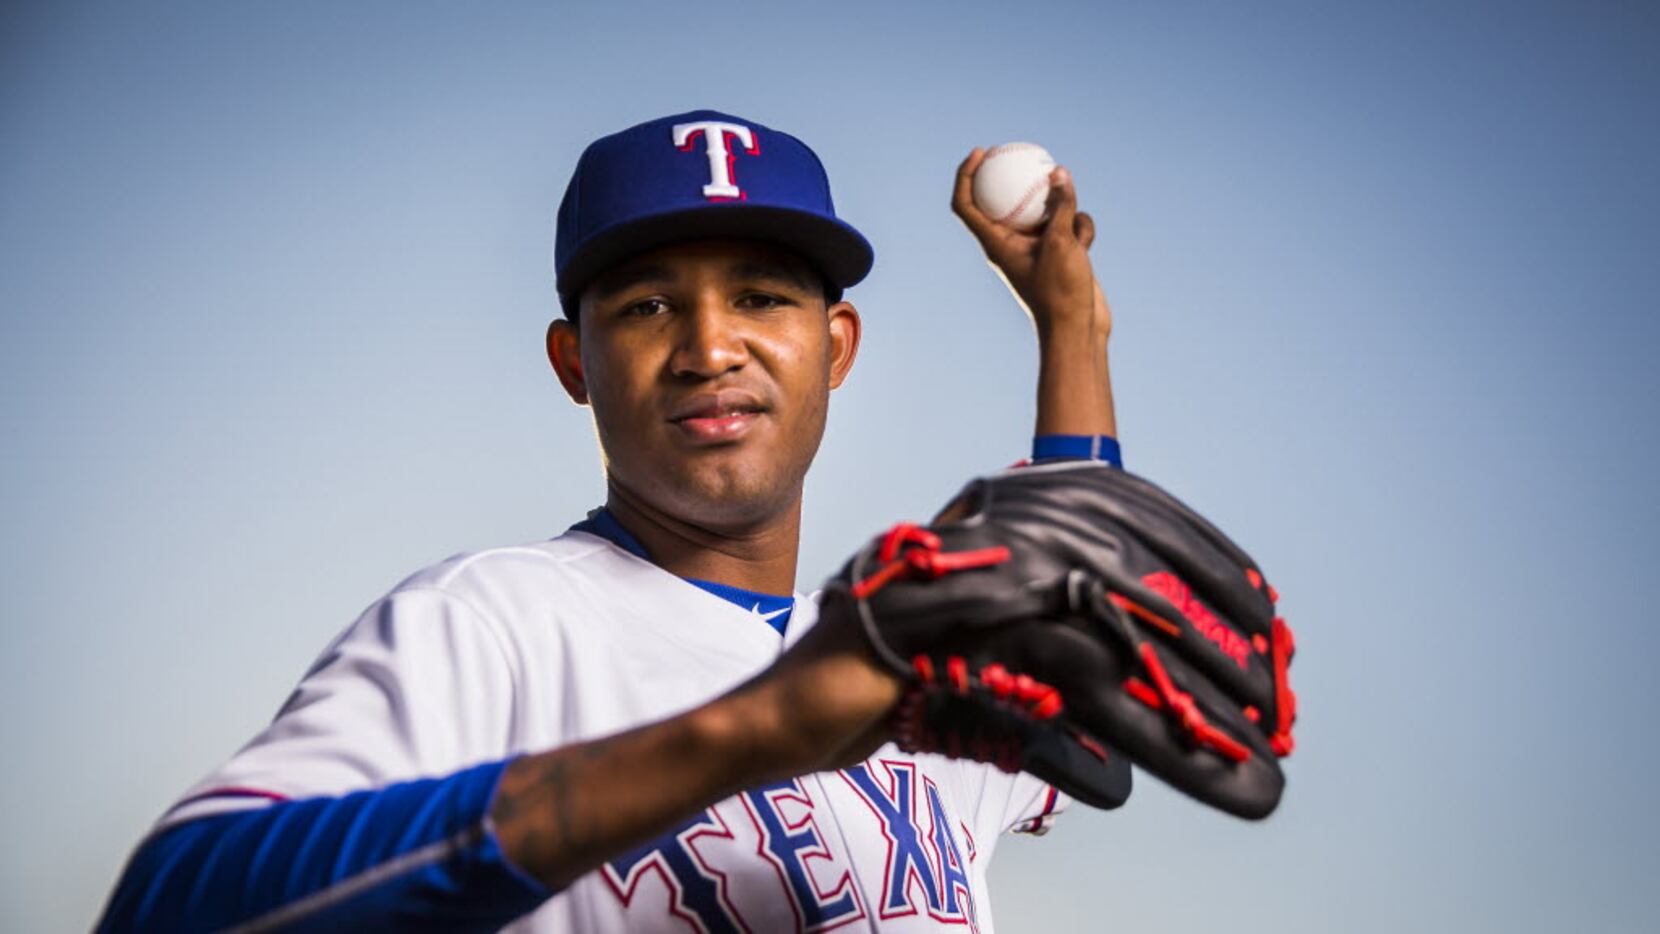 Texas Rangers pitcher Yohander Mendez photographed during spring training photo day at the...